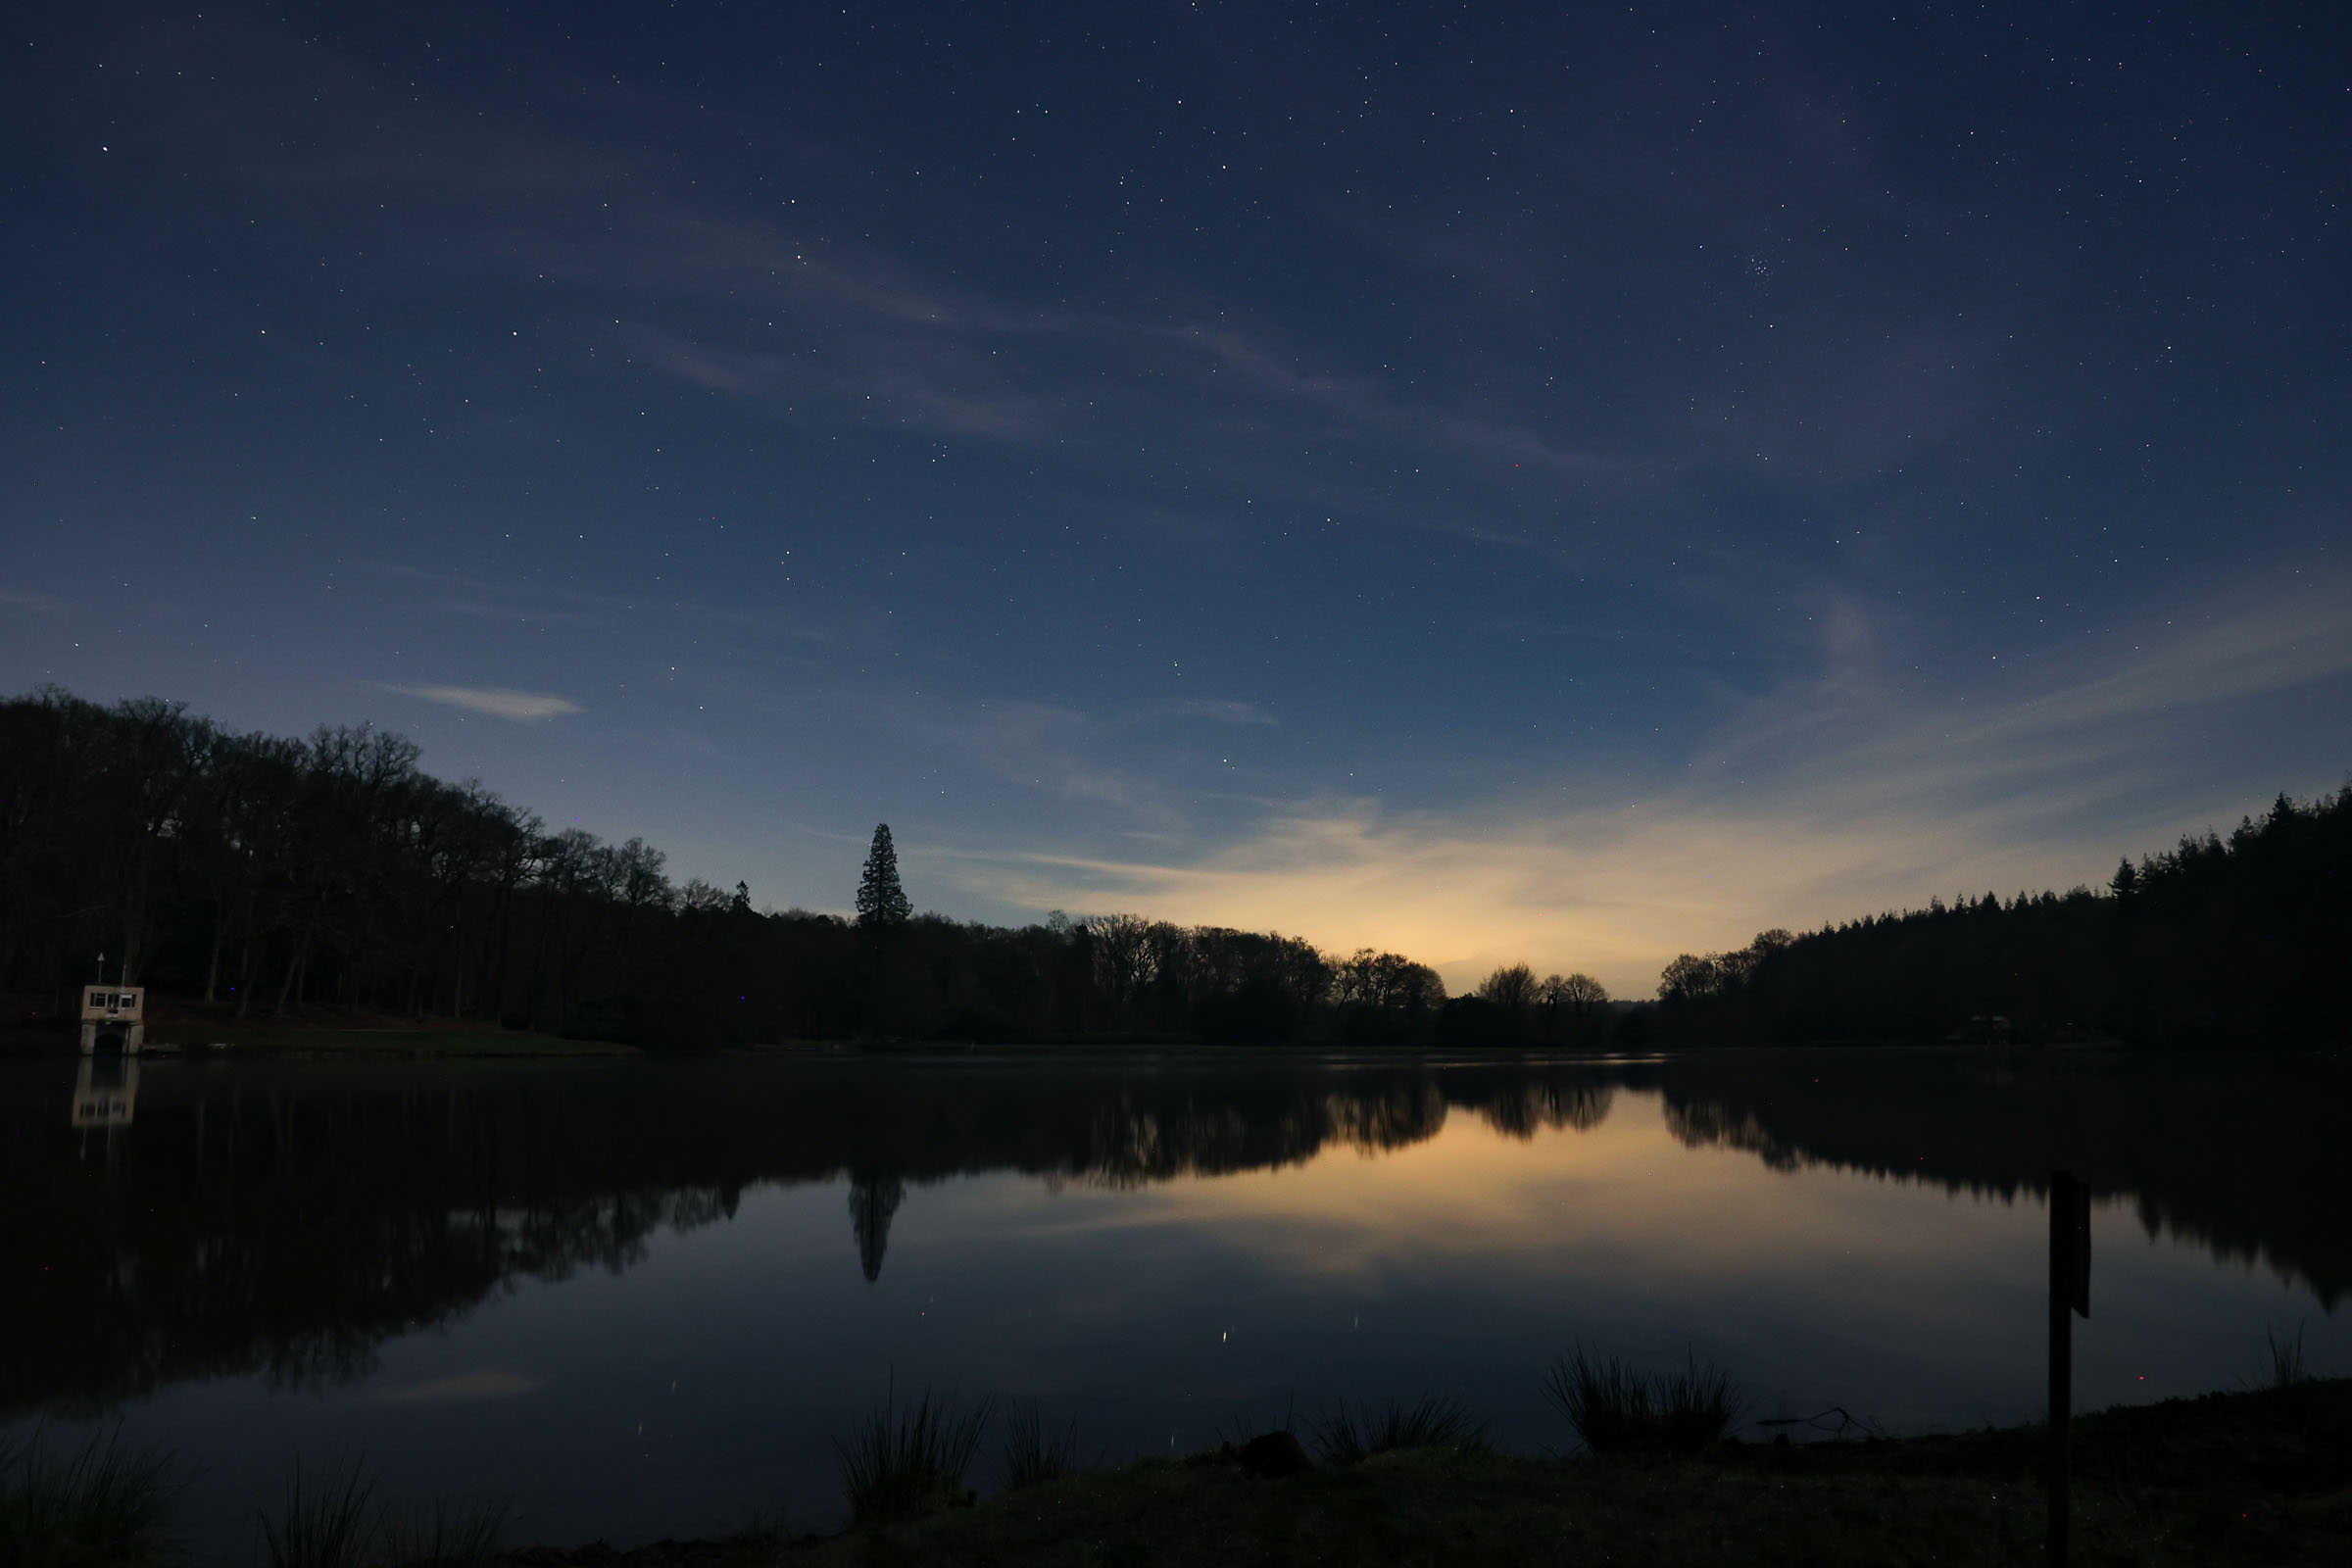 Image taken with Canon EOS R6 of night sky over lake